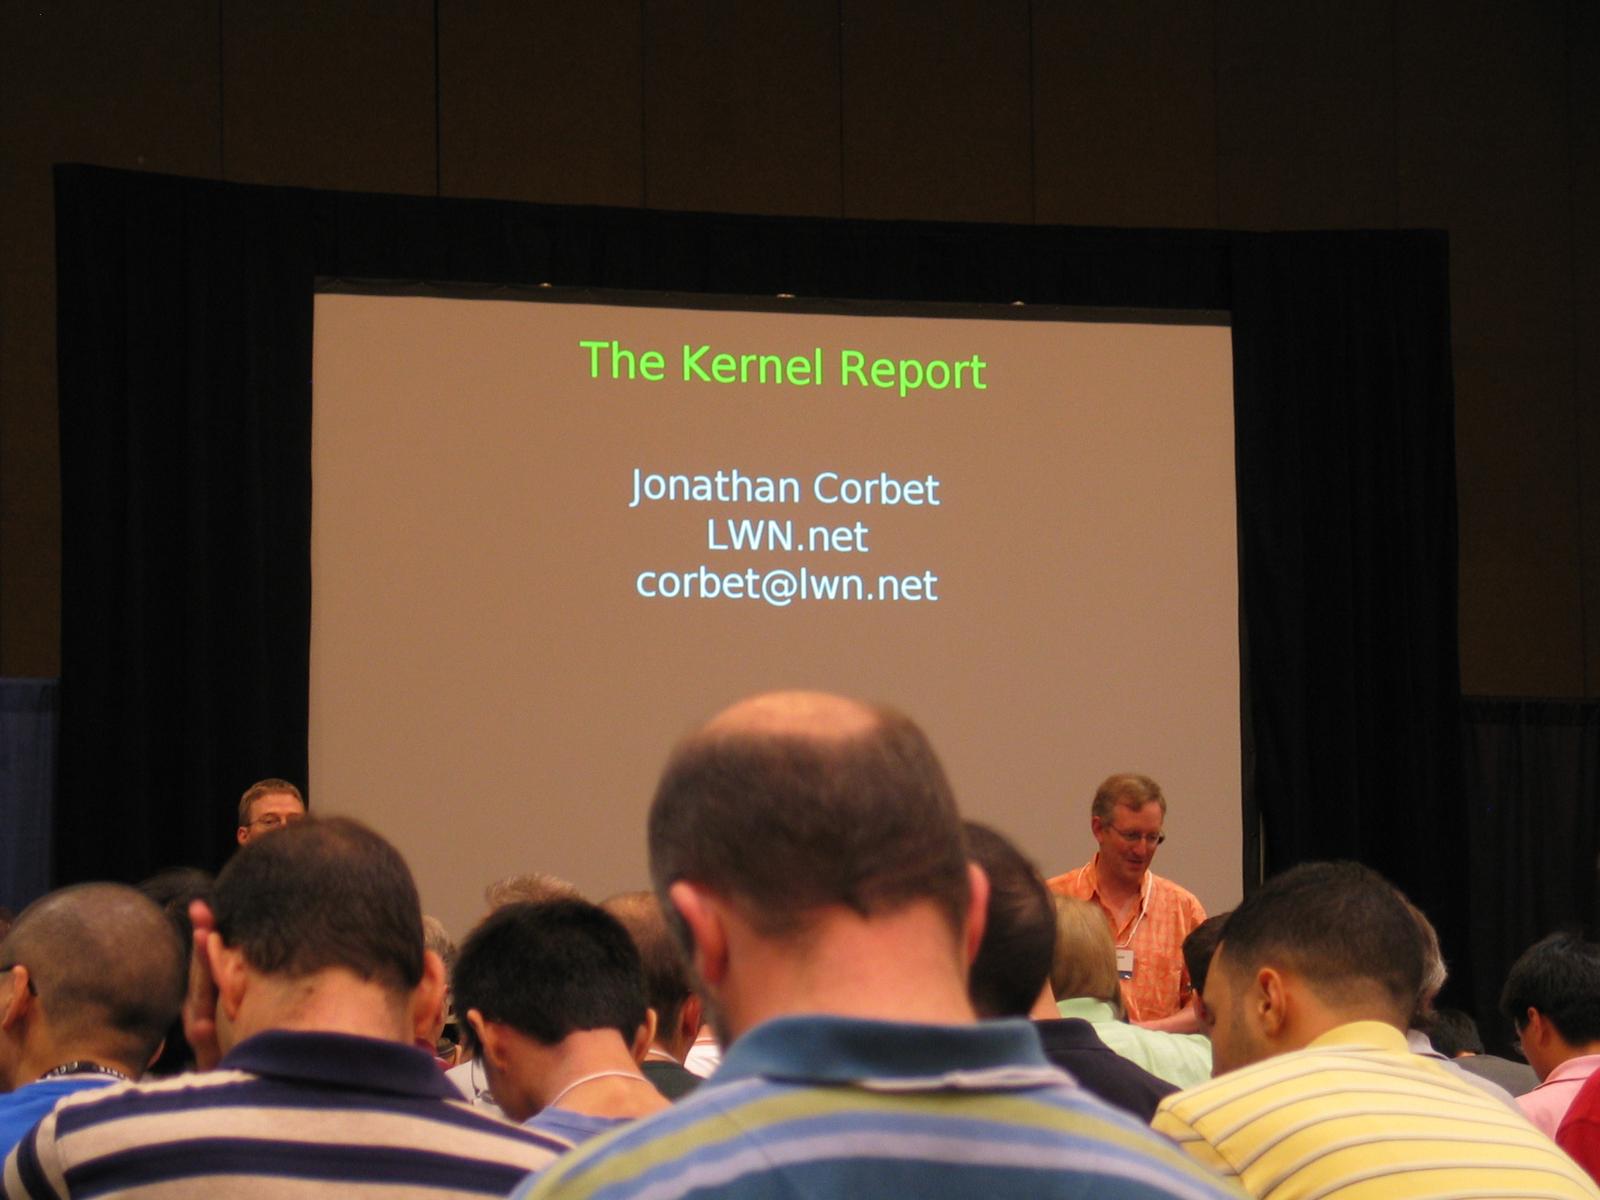 The Kernel Report